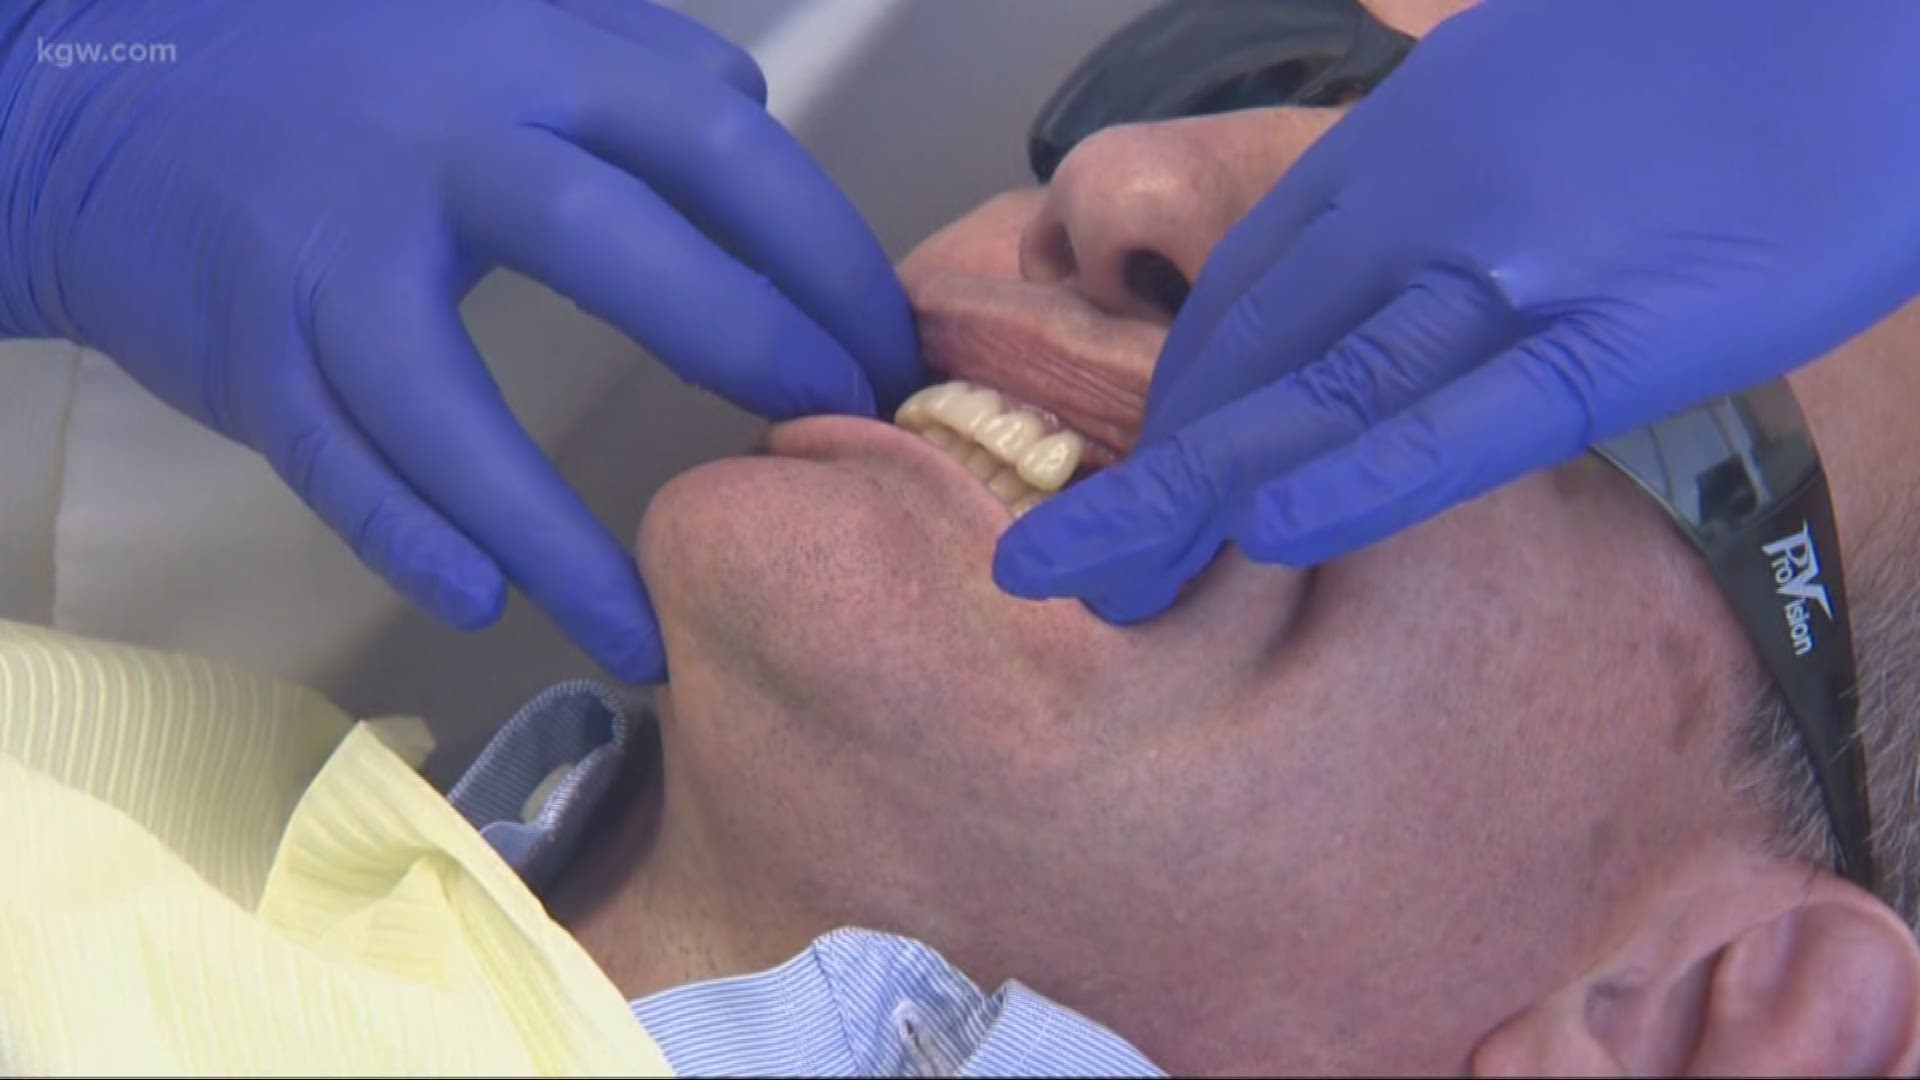 Some dental office workers are worried about going back to work. They feel they are vulnerable to the coronavirus.